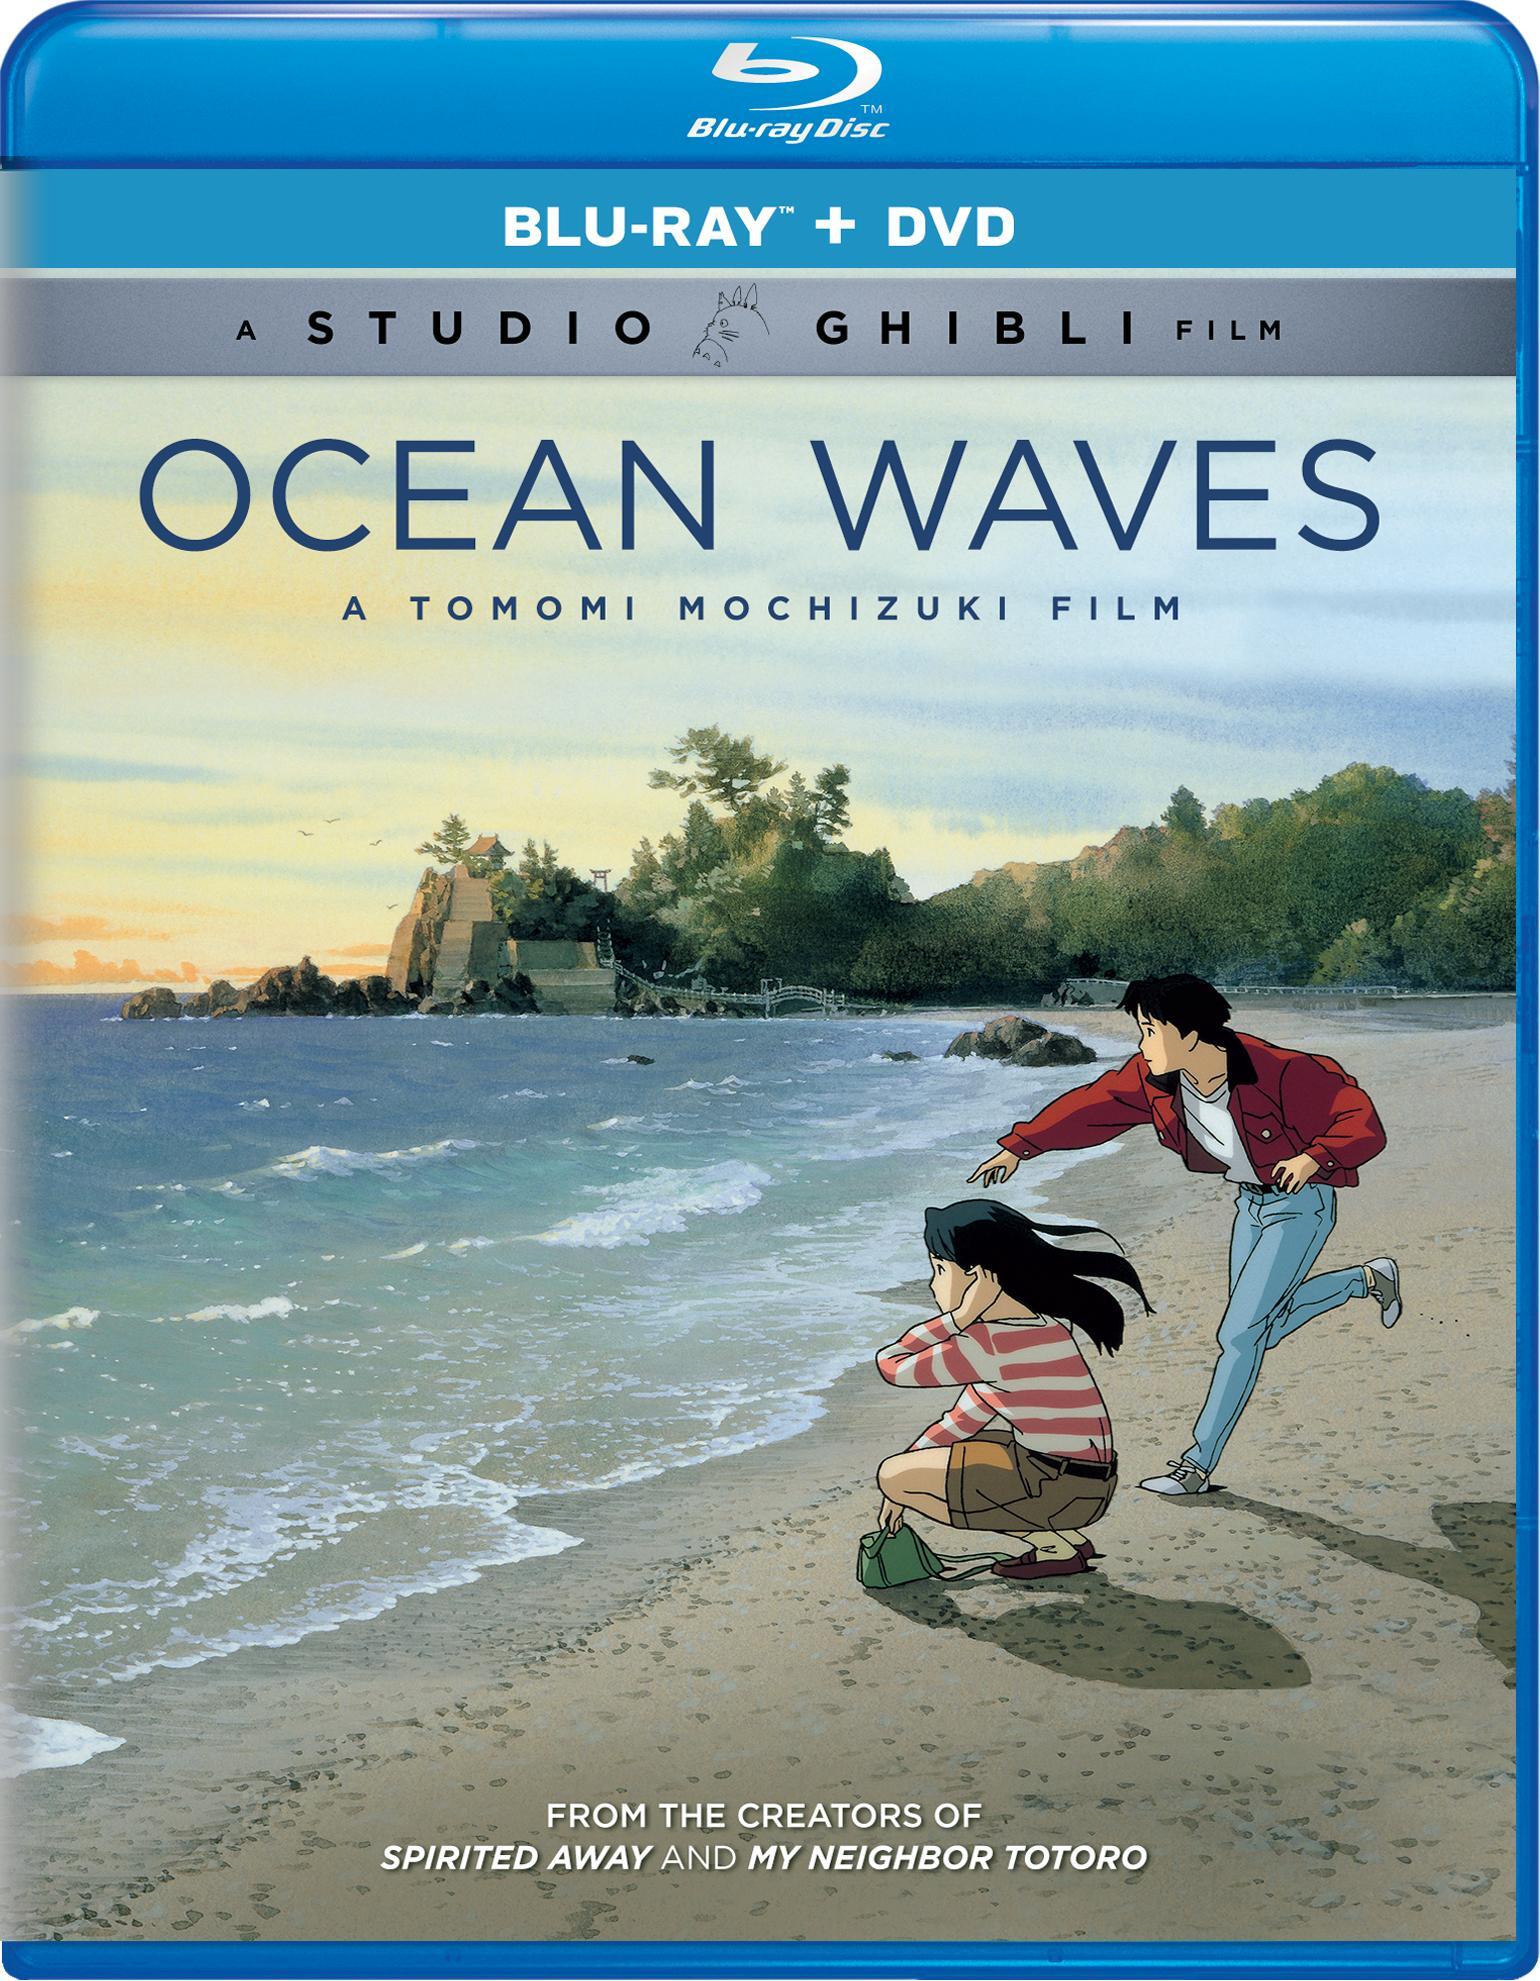 Ocean Waves (Digital) - Blu-ray [ 2016 ]  - Foreign Movies On Blu-ray - Movies On GRUV